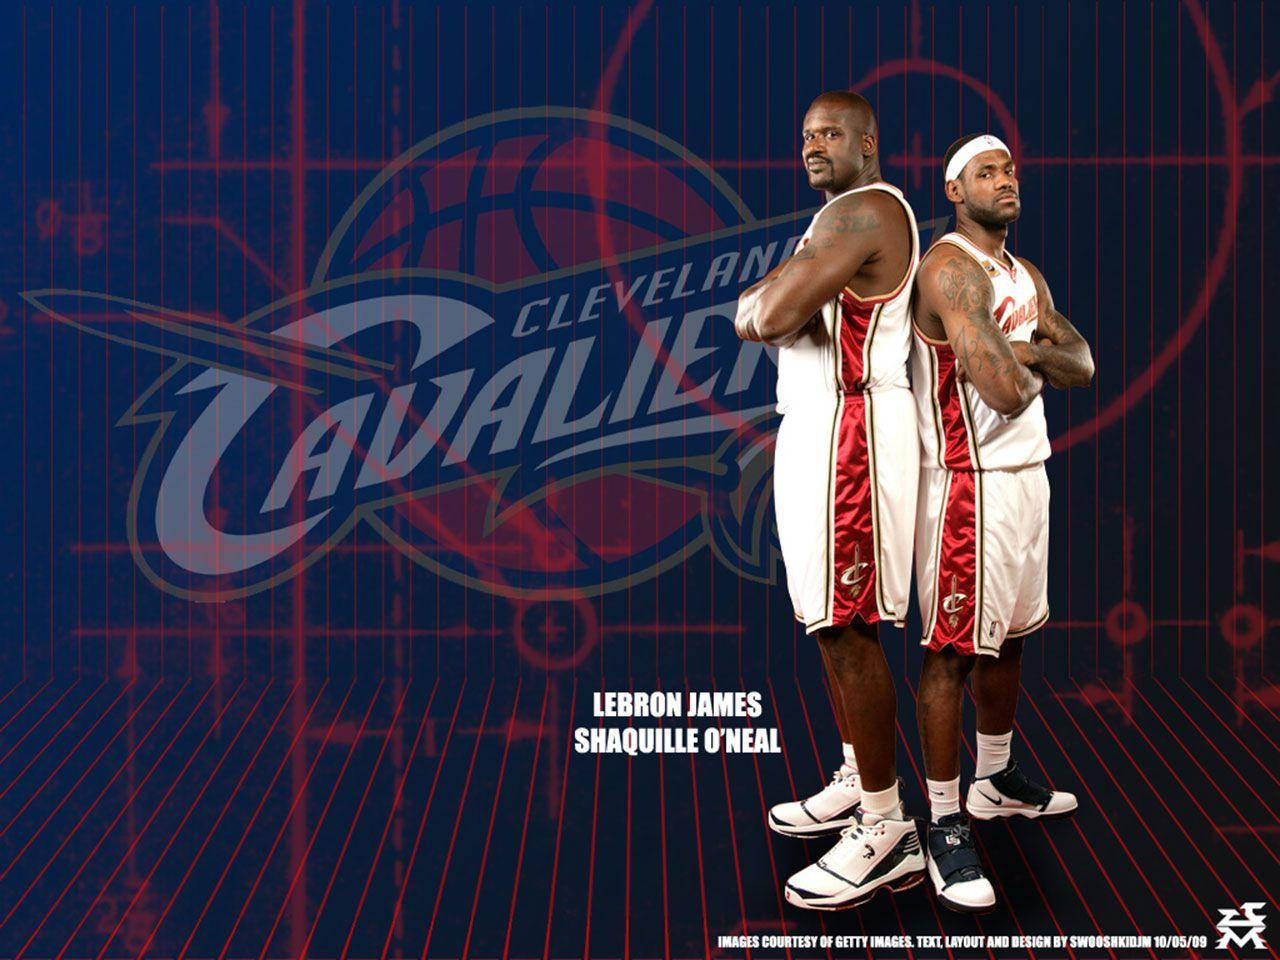 Shaquille O'neal Cavalier Poster Background